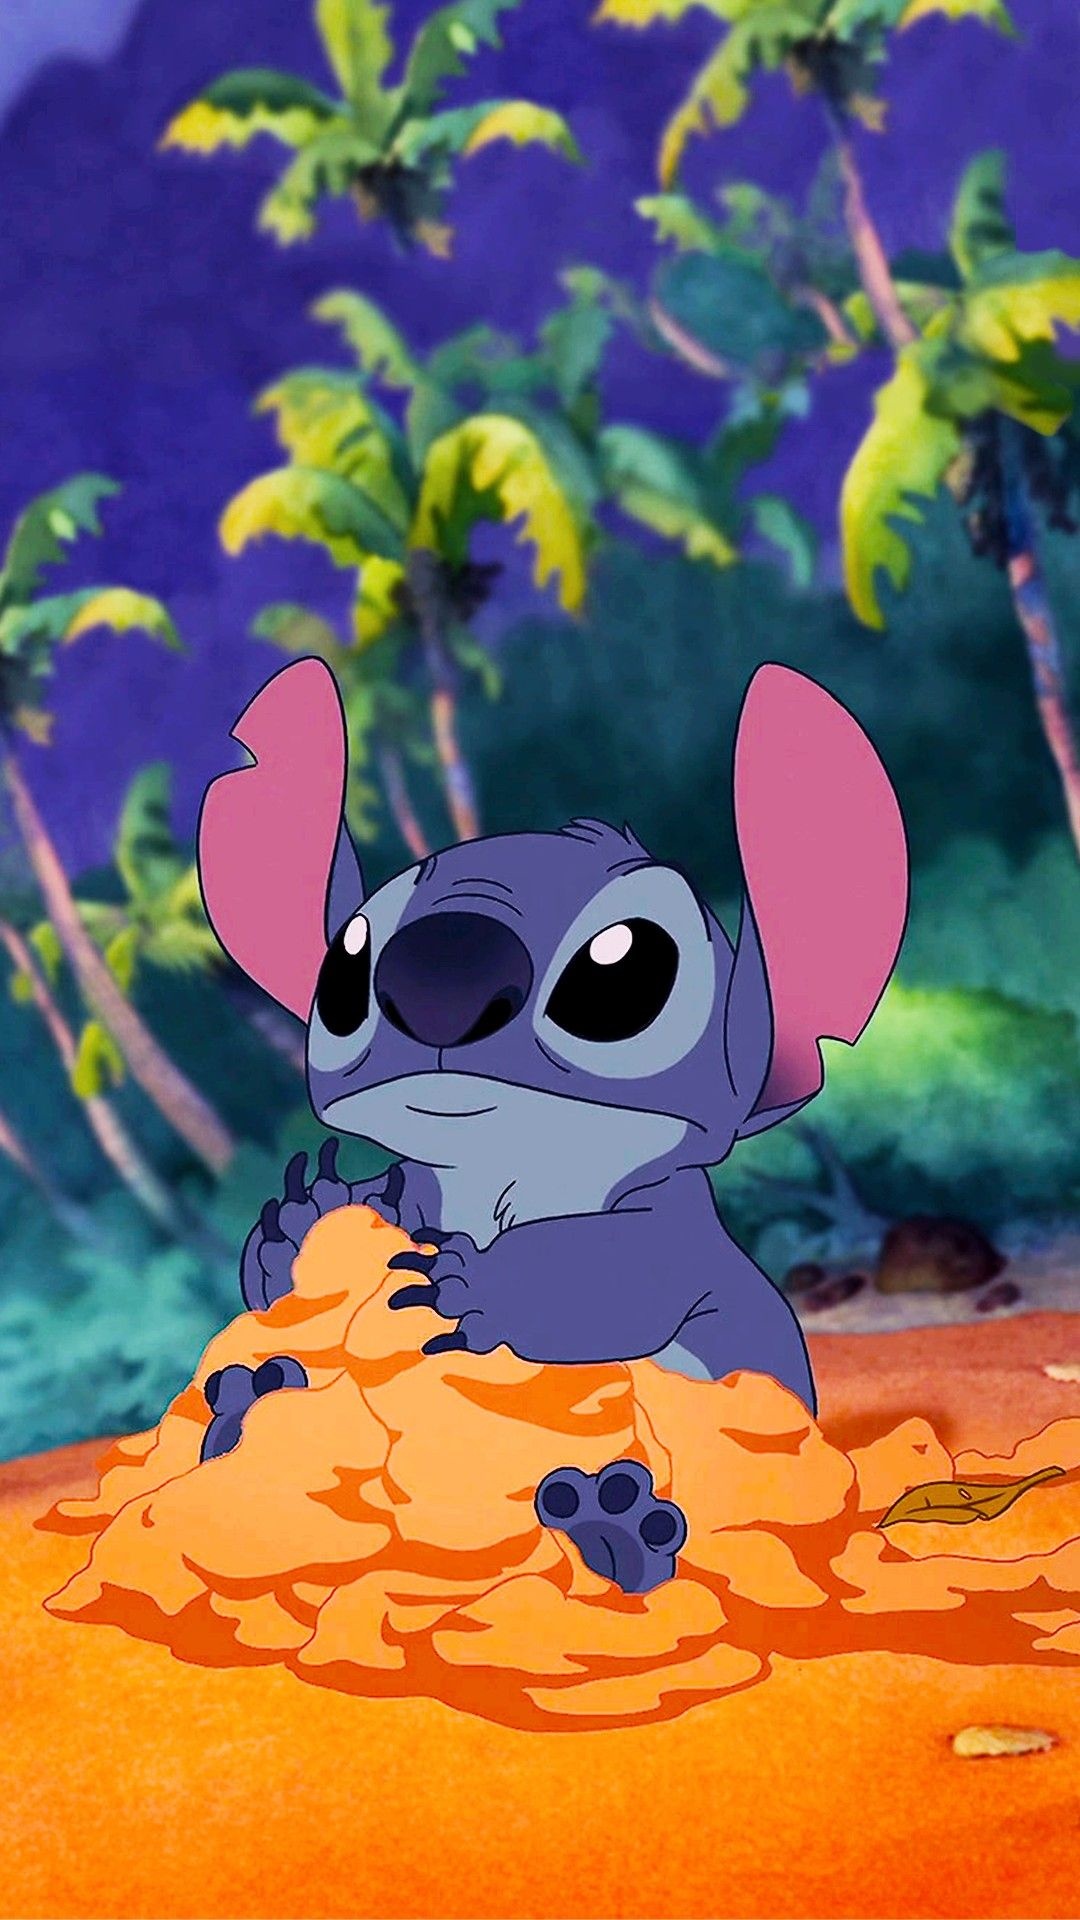 Stitch animation, Blue and cute, Love for Stitch, Desenhos wallpapers, 1080x1920 Full HD Phone